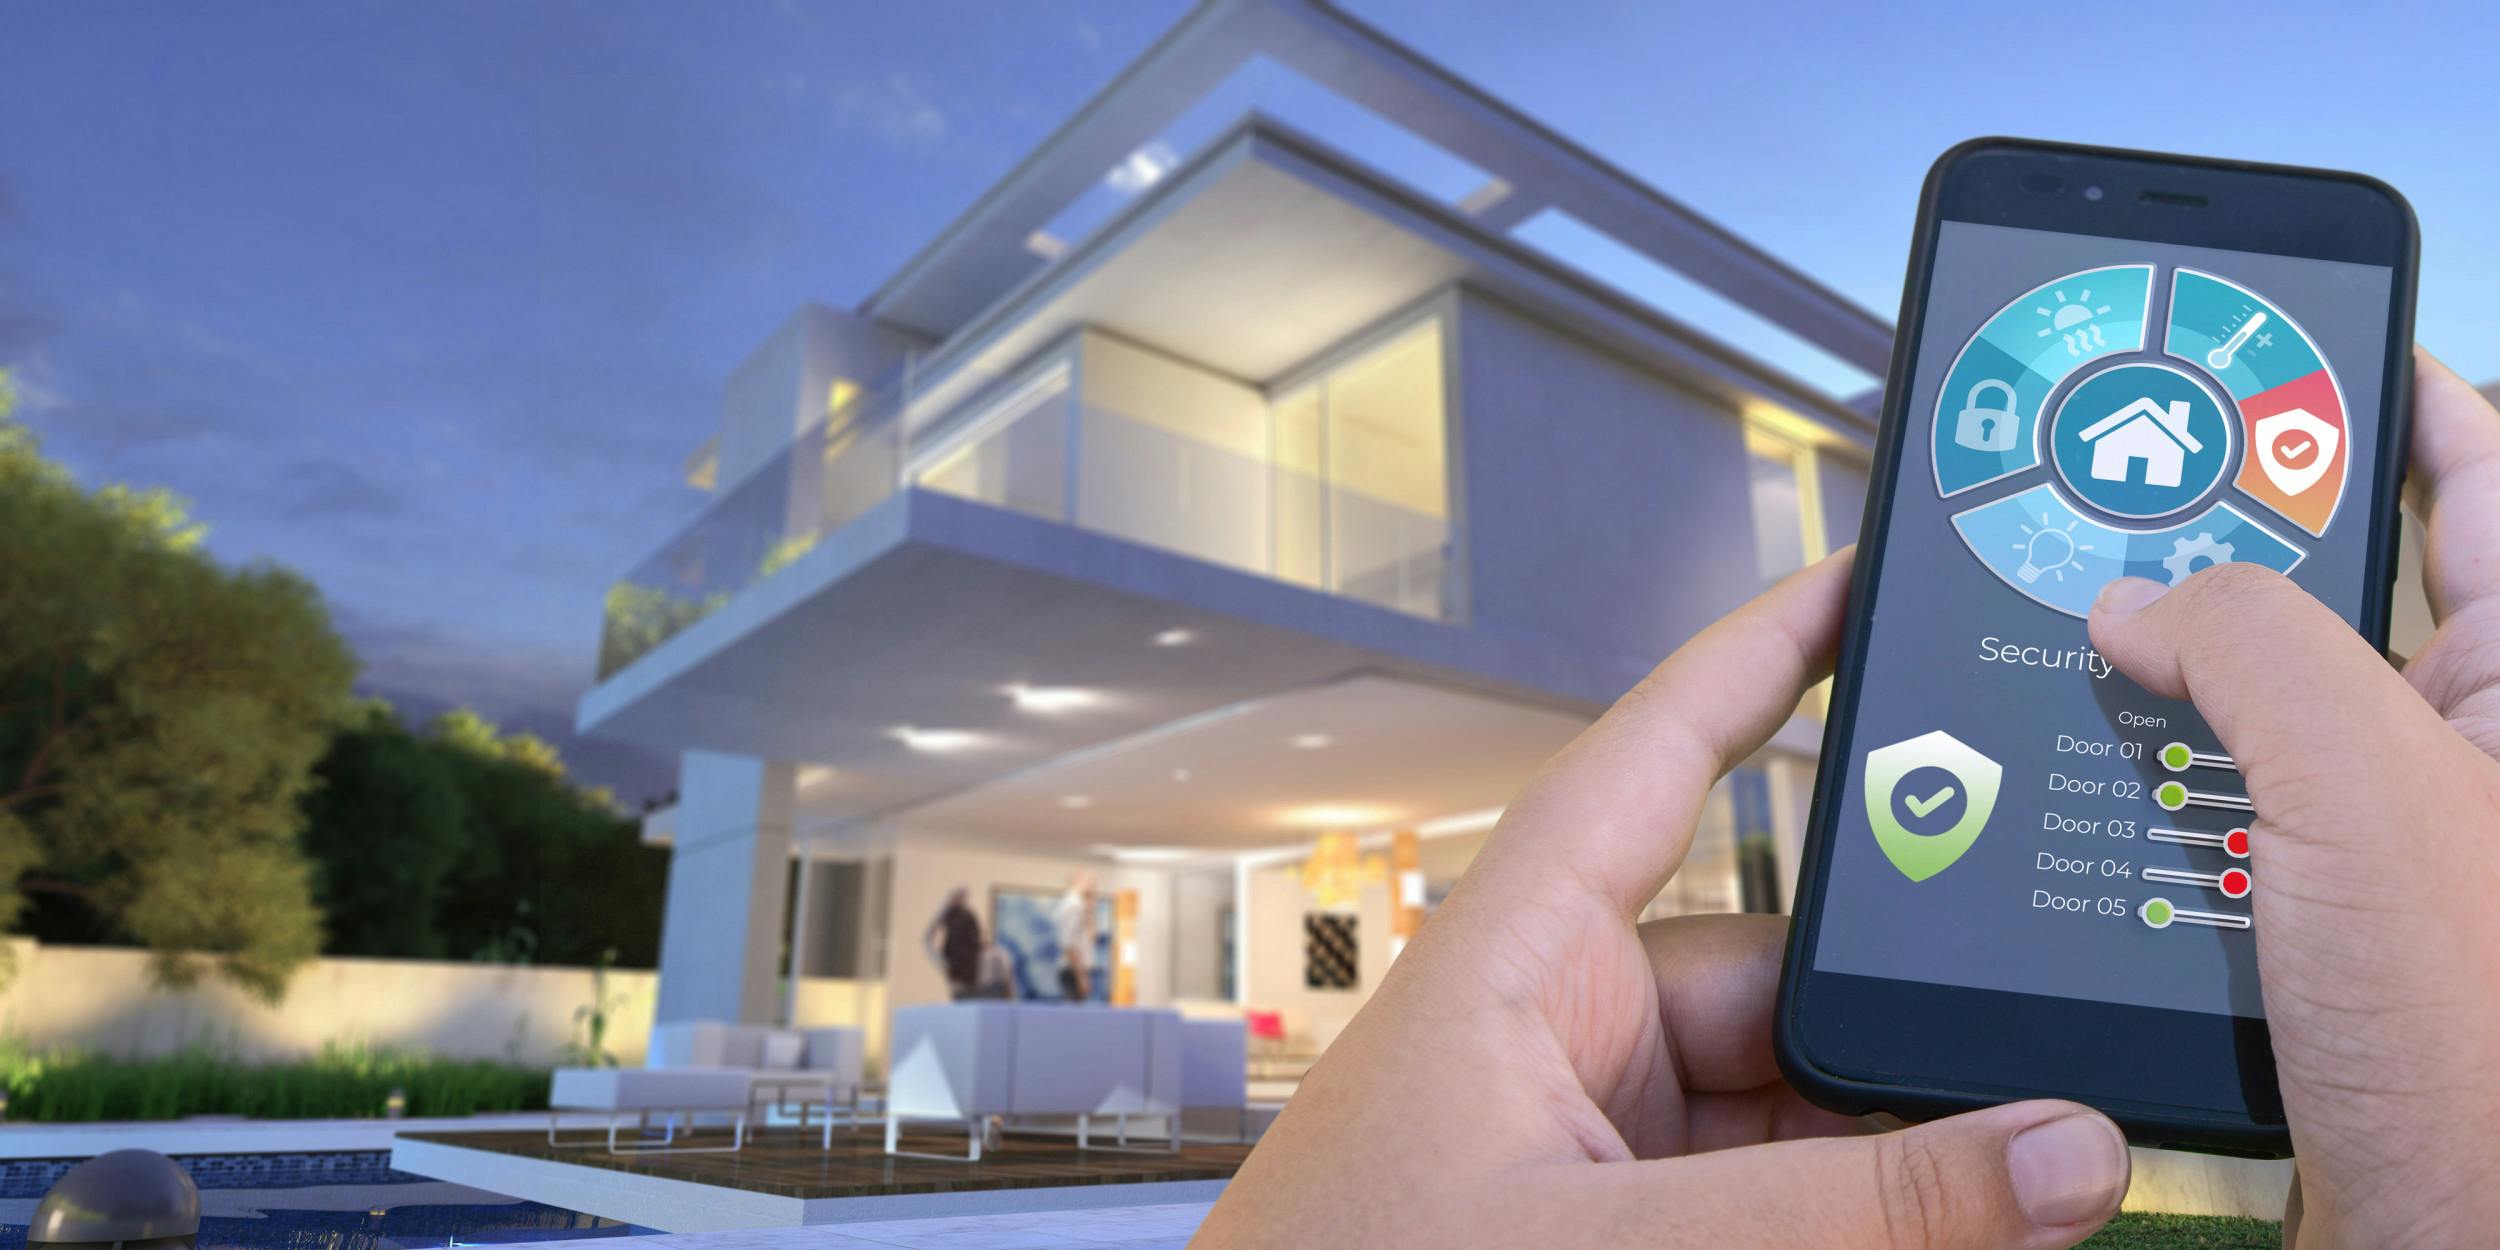 The Future of Smart Homes – Connected, Complementary, Conscious